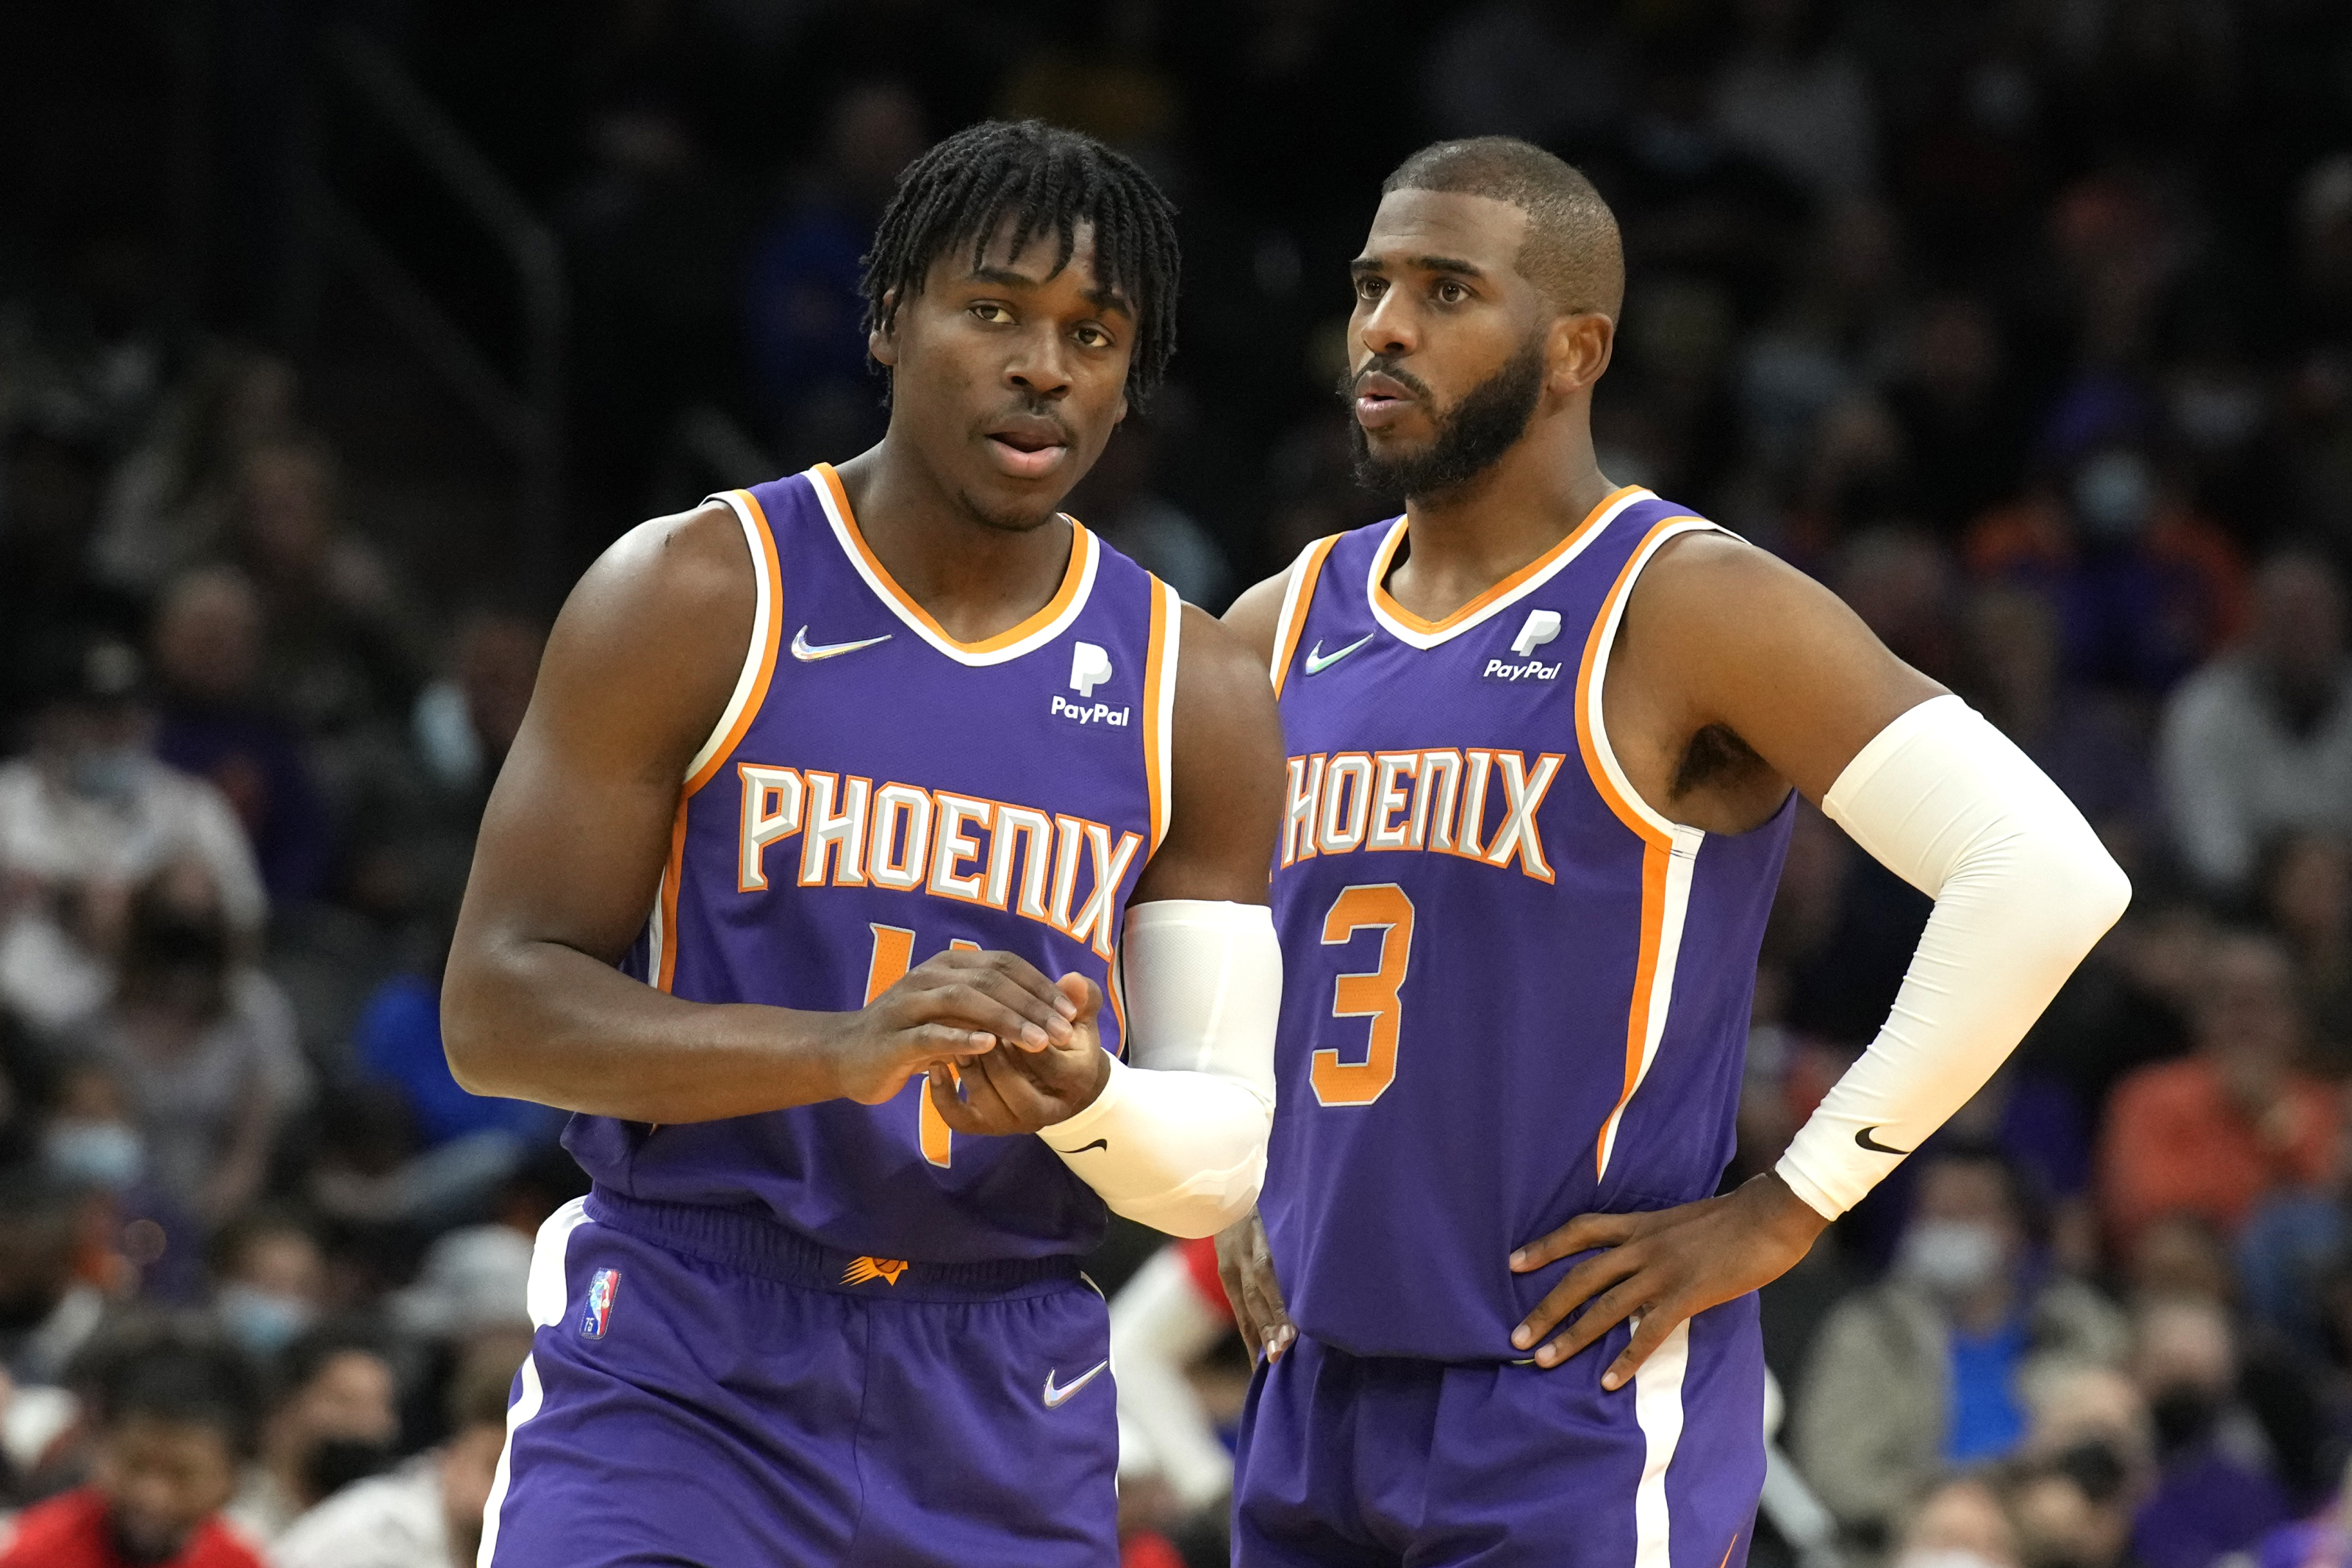 Phoenix Suns - Another honor for the now 11x All-NBA selection